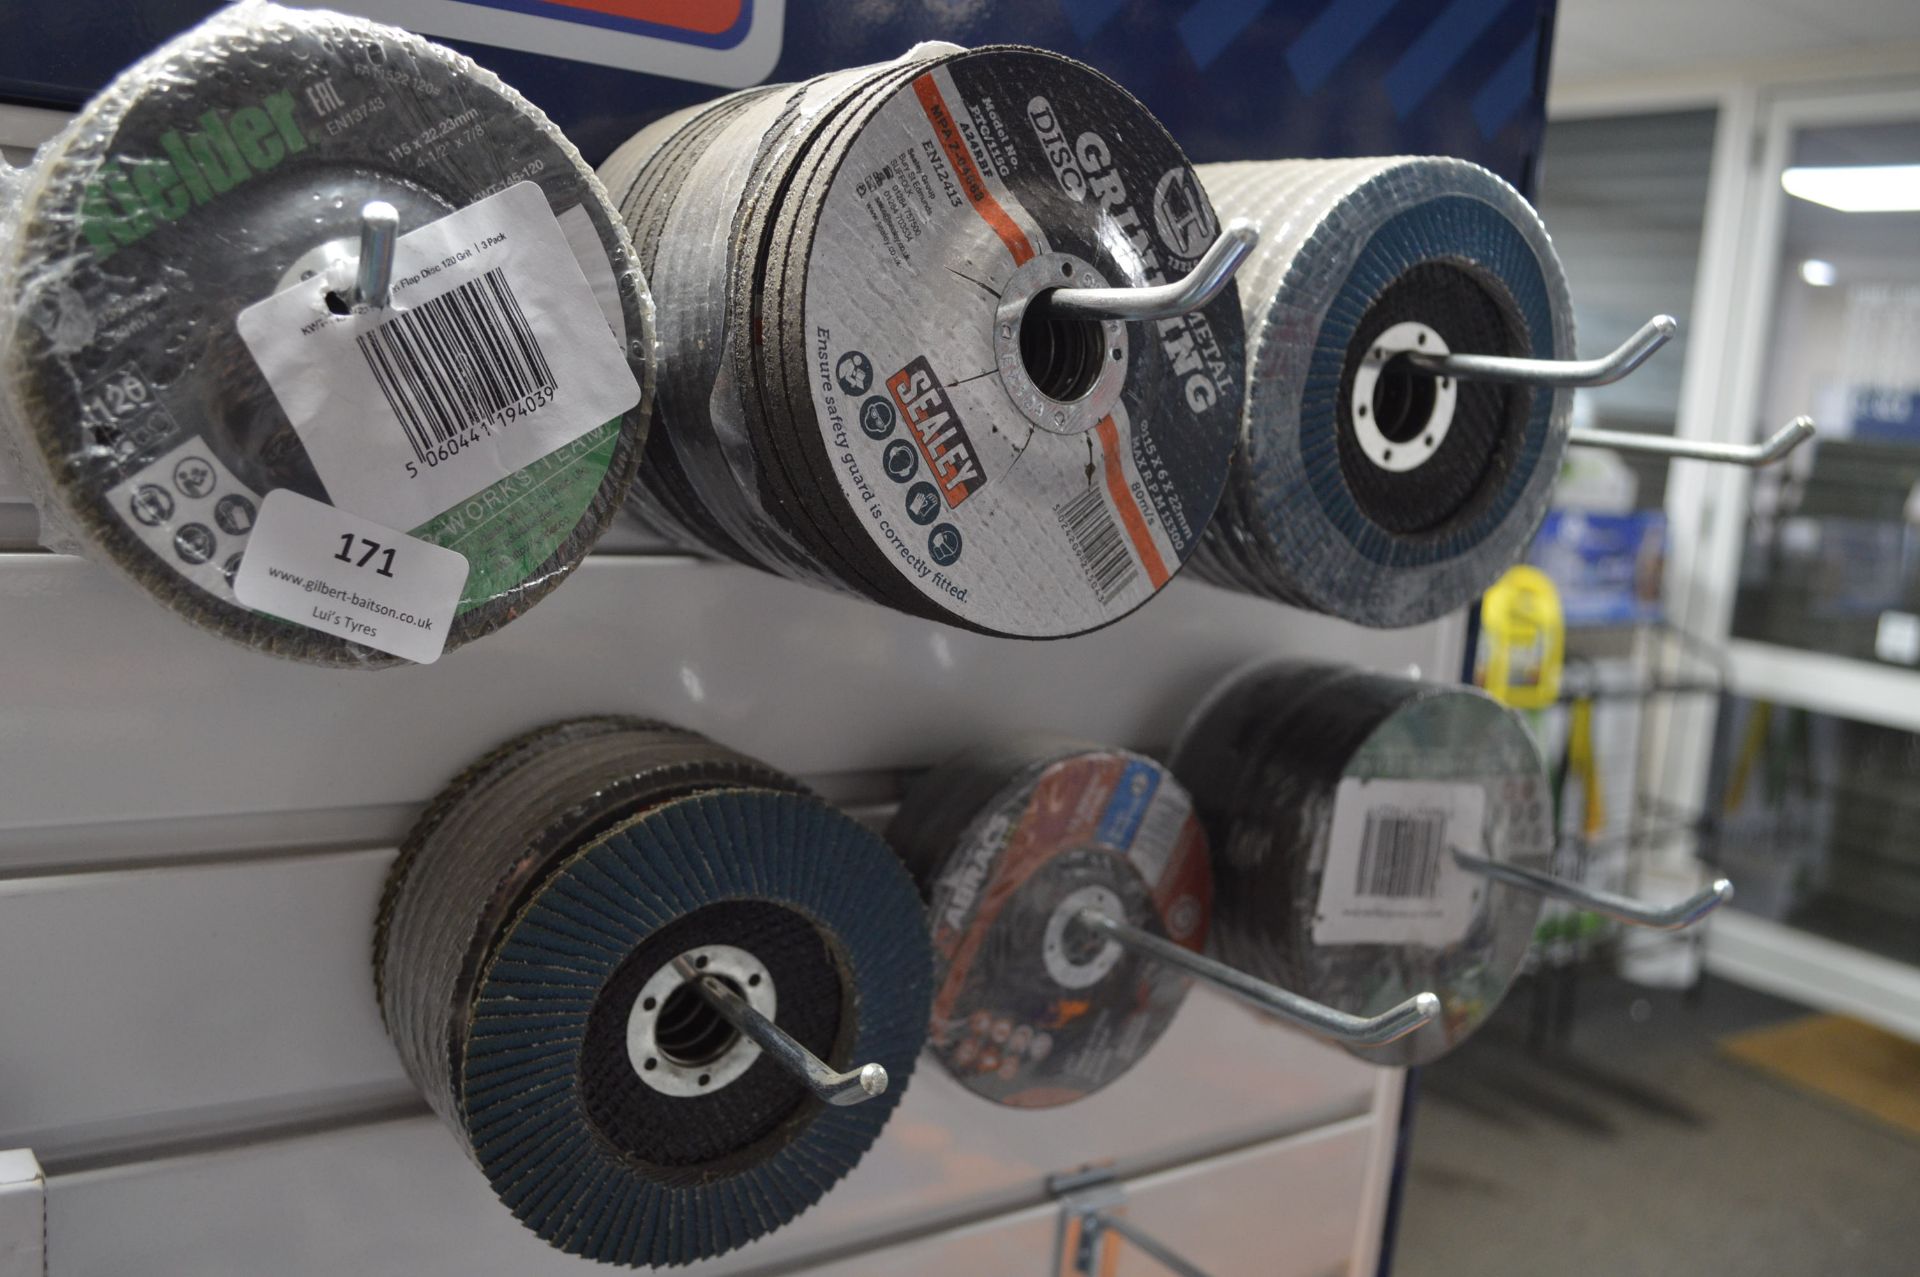 *Various Grinding Discs, Cutting Discs, and Grit Discs